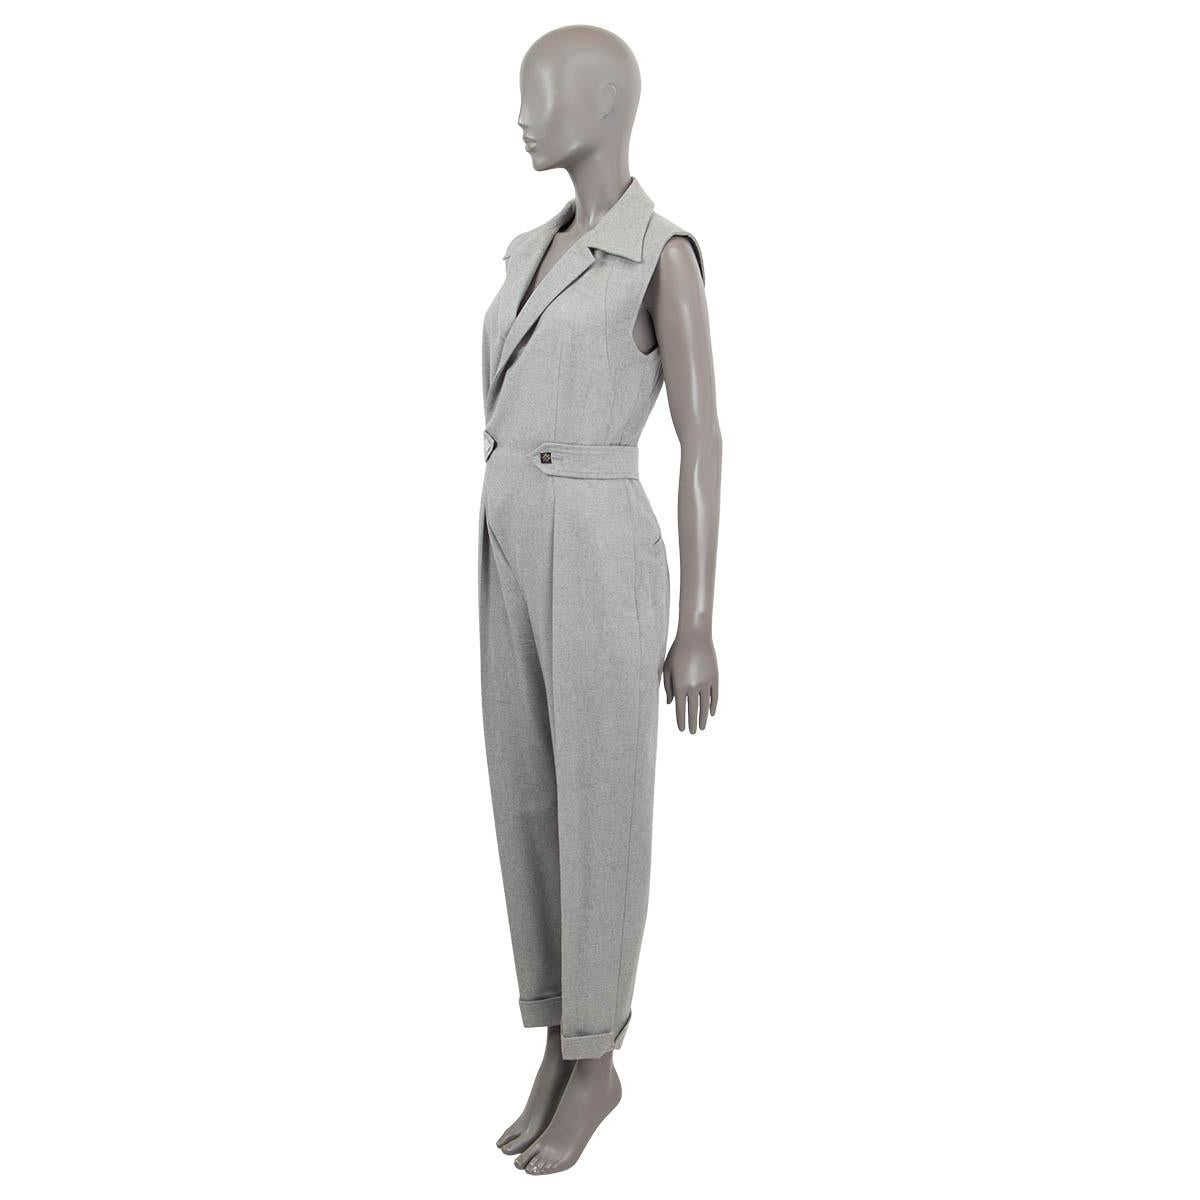 100% authentic Louis Vuitton 2021 Spring/Summer sleeveless wrap jumpsuit in light grey flannel cashmere (62%), wool (36%) and silk (2%) and lined in silk (100%). The belted design closes with two silver-tone logo engraved square buttons at front and